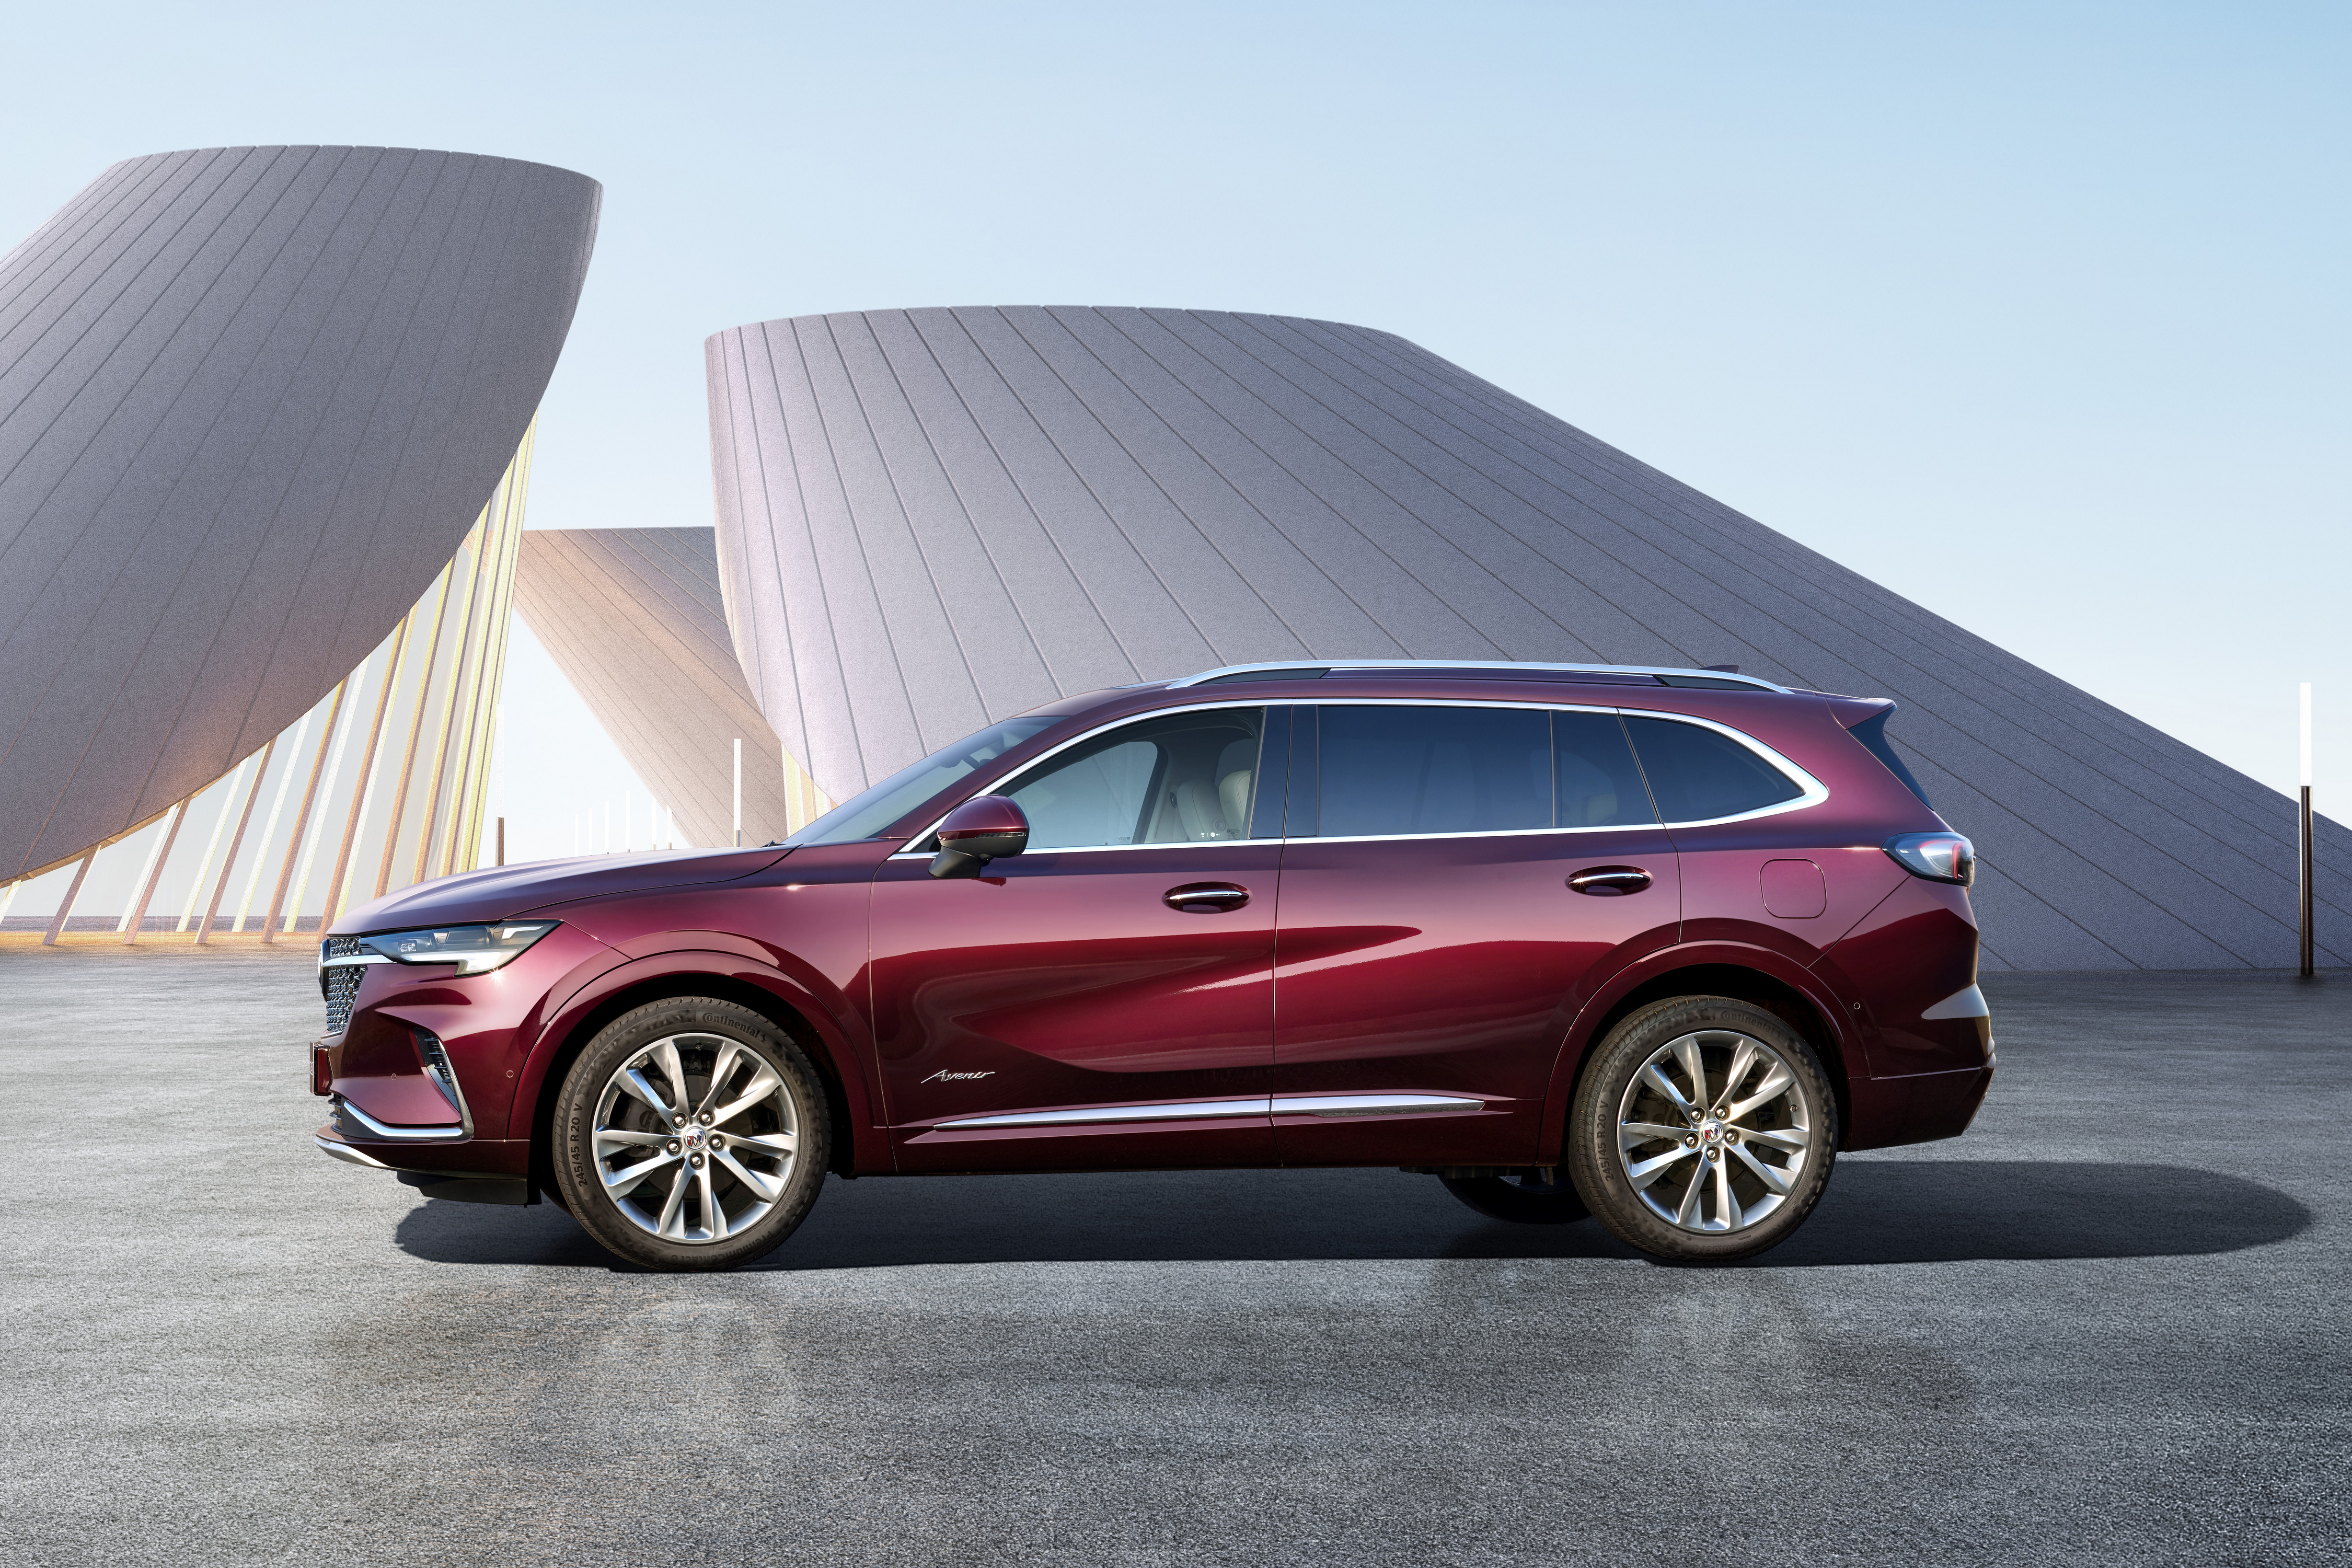 Wallpapers auto Buick crossover on the desktop